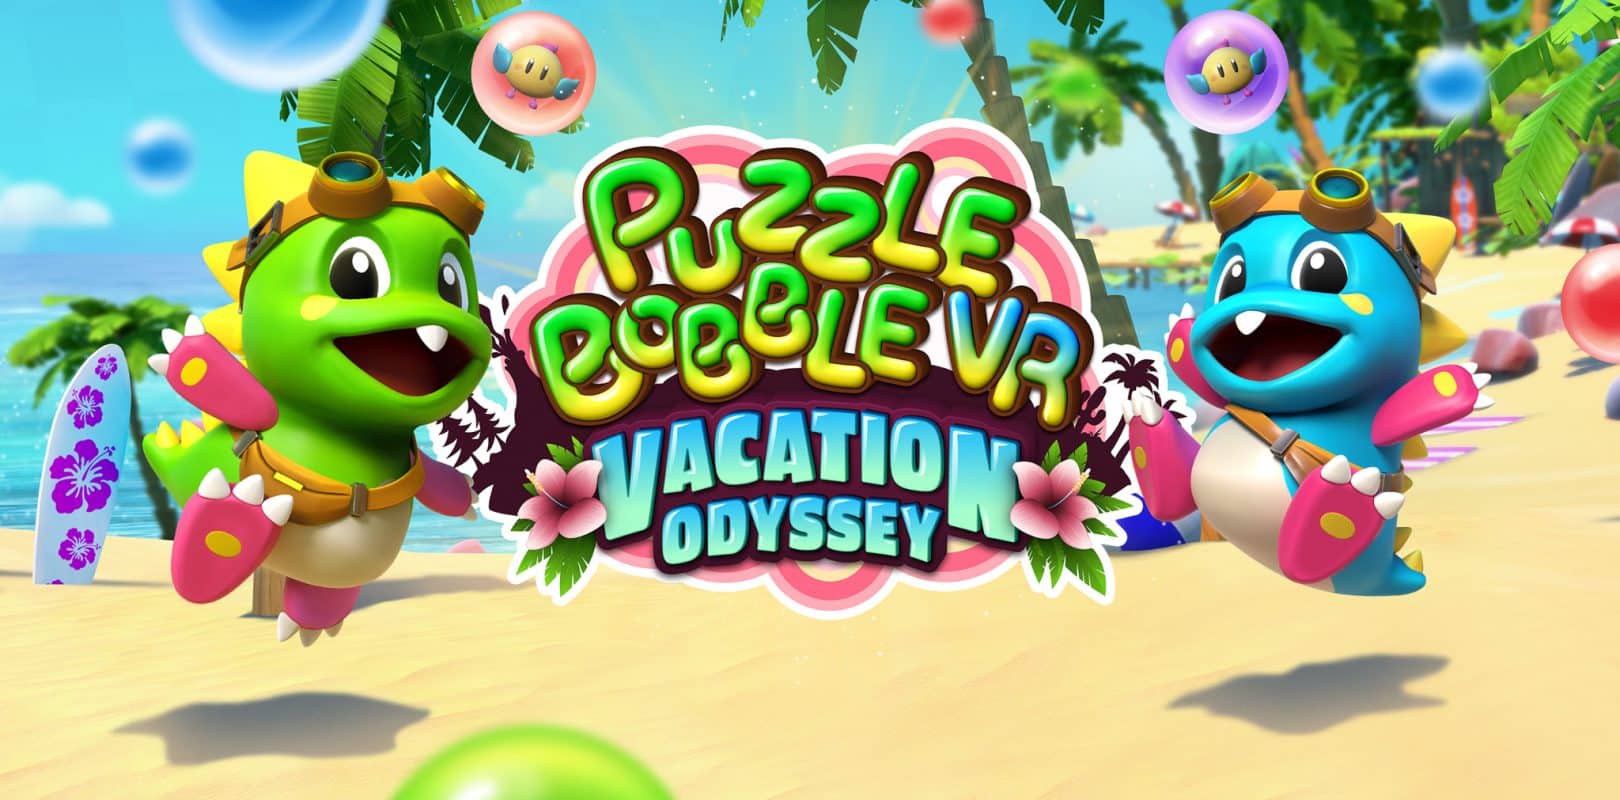 puzzle-bobble-vr-vacation-odyssey